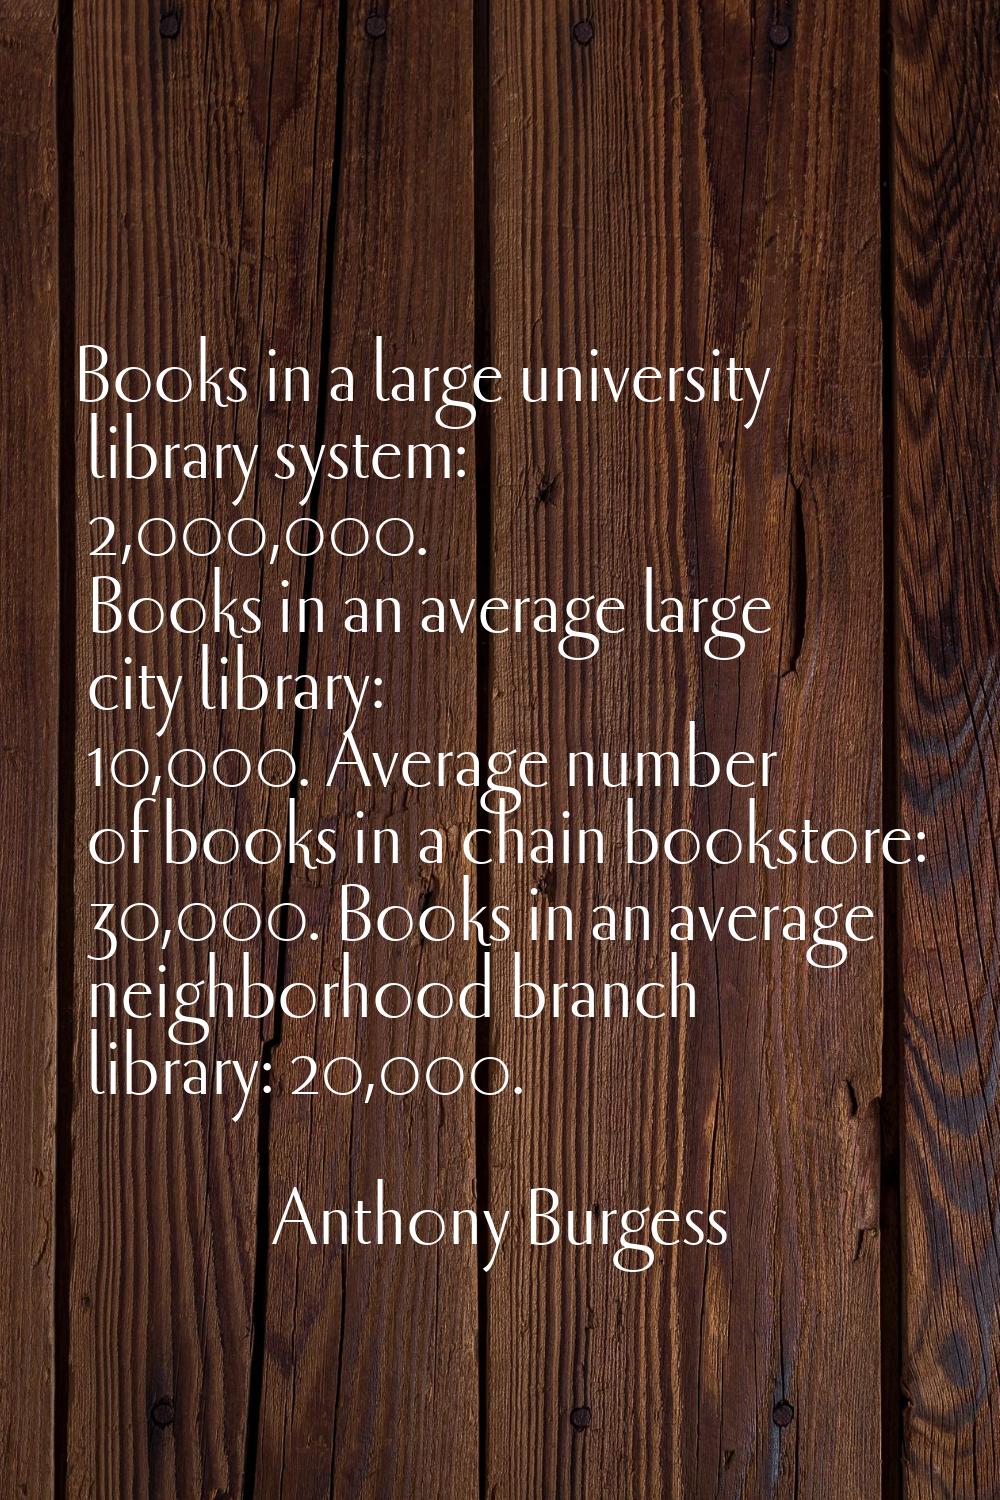 Books in a large university library system: 2,000,000. Books in an average large city library: 10,0